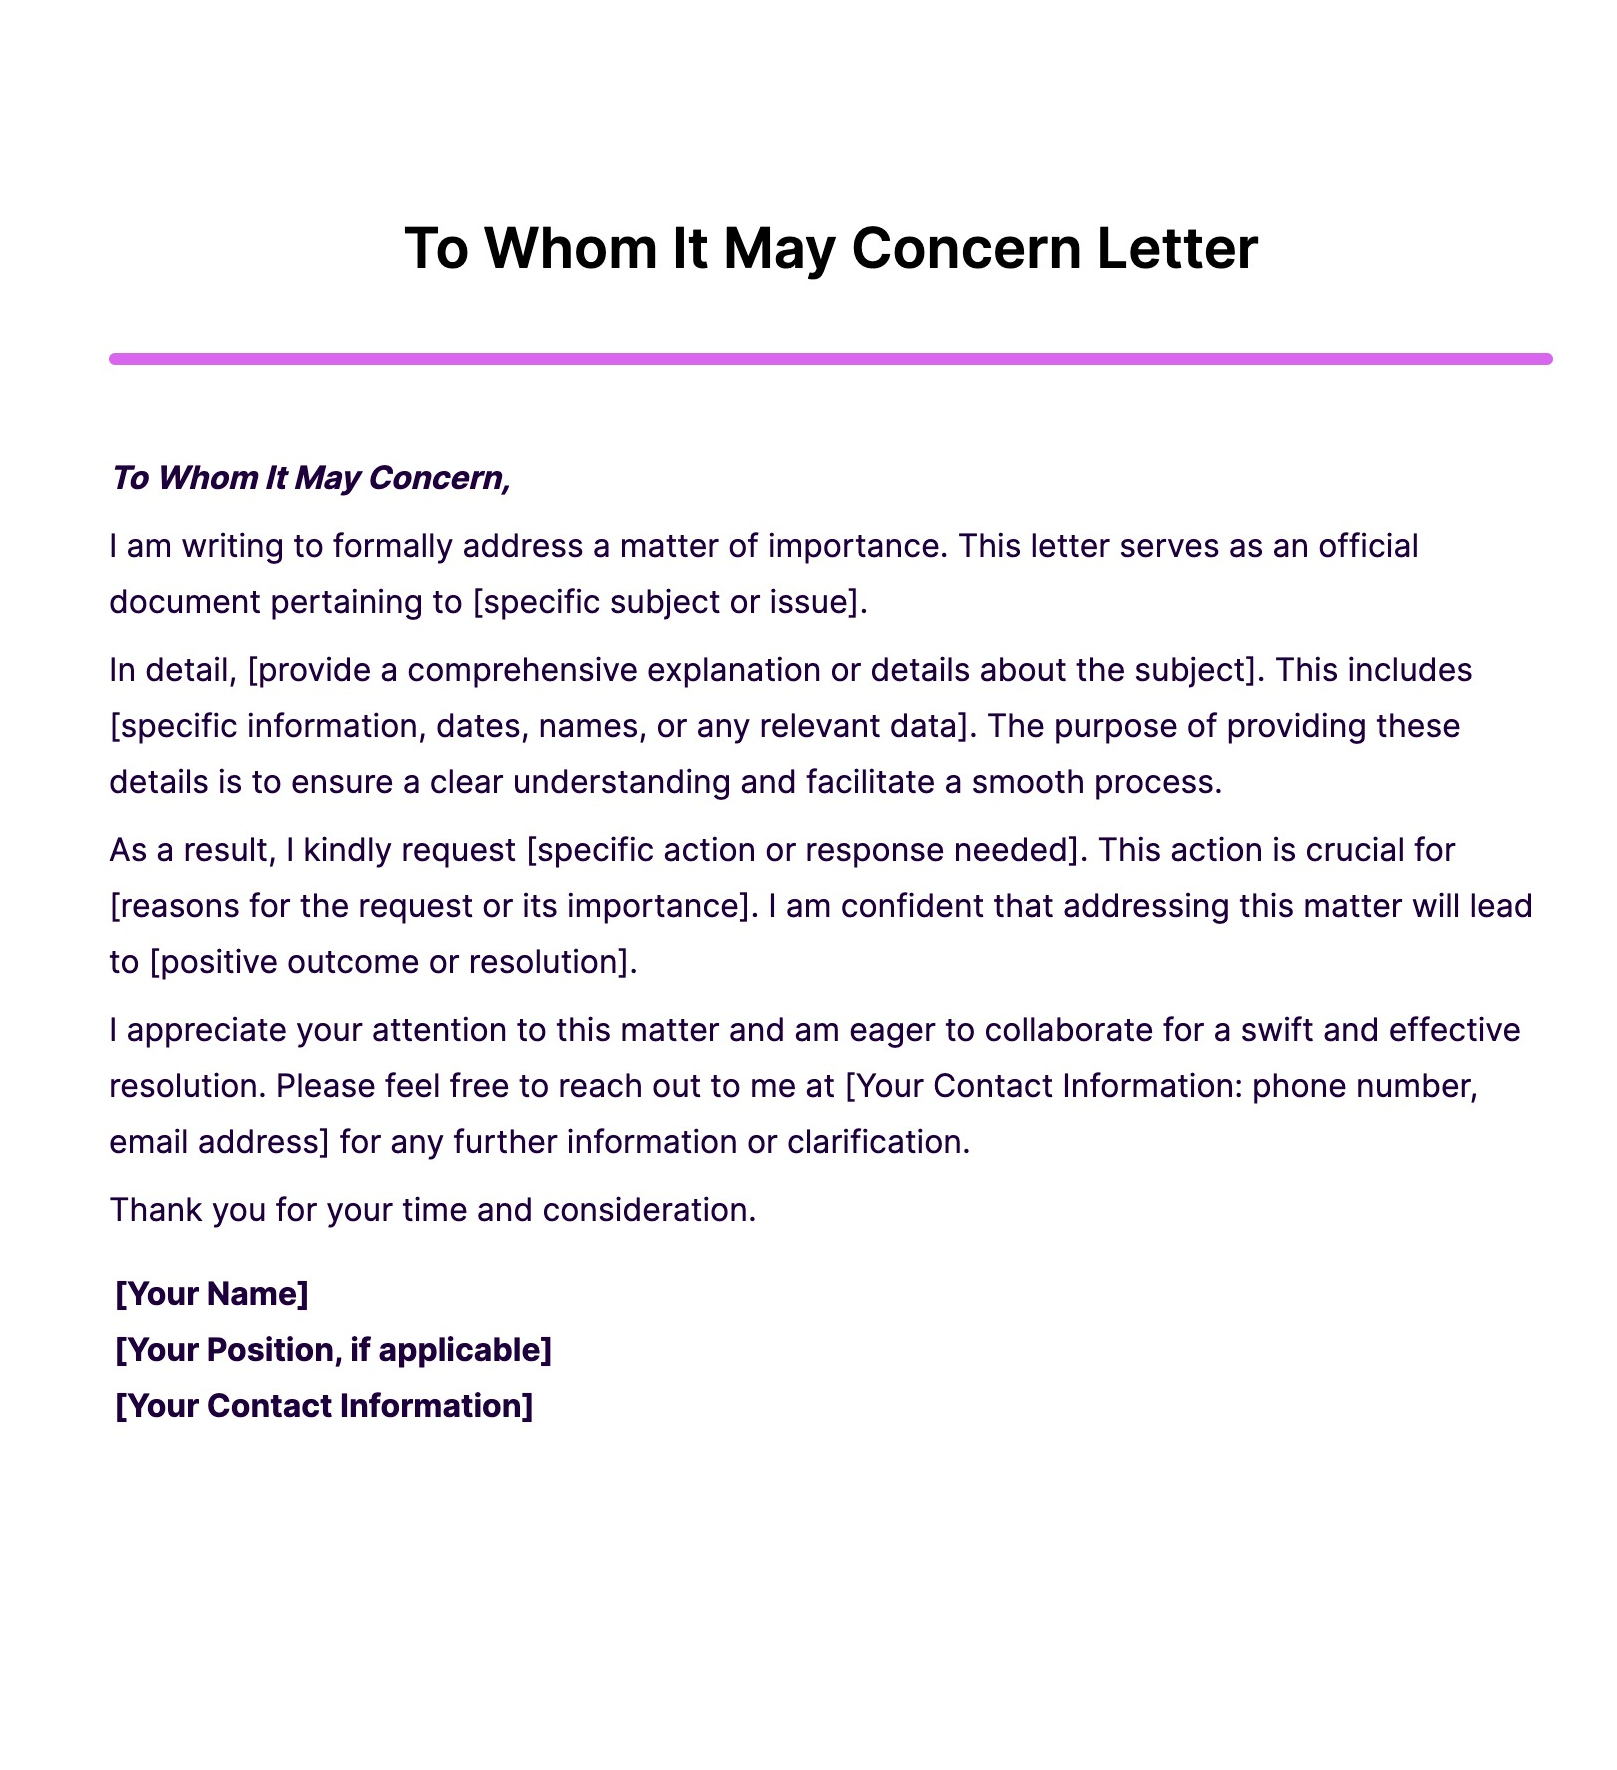 To Whom It May Concern Letter